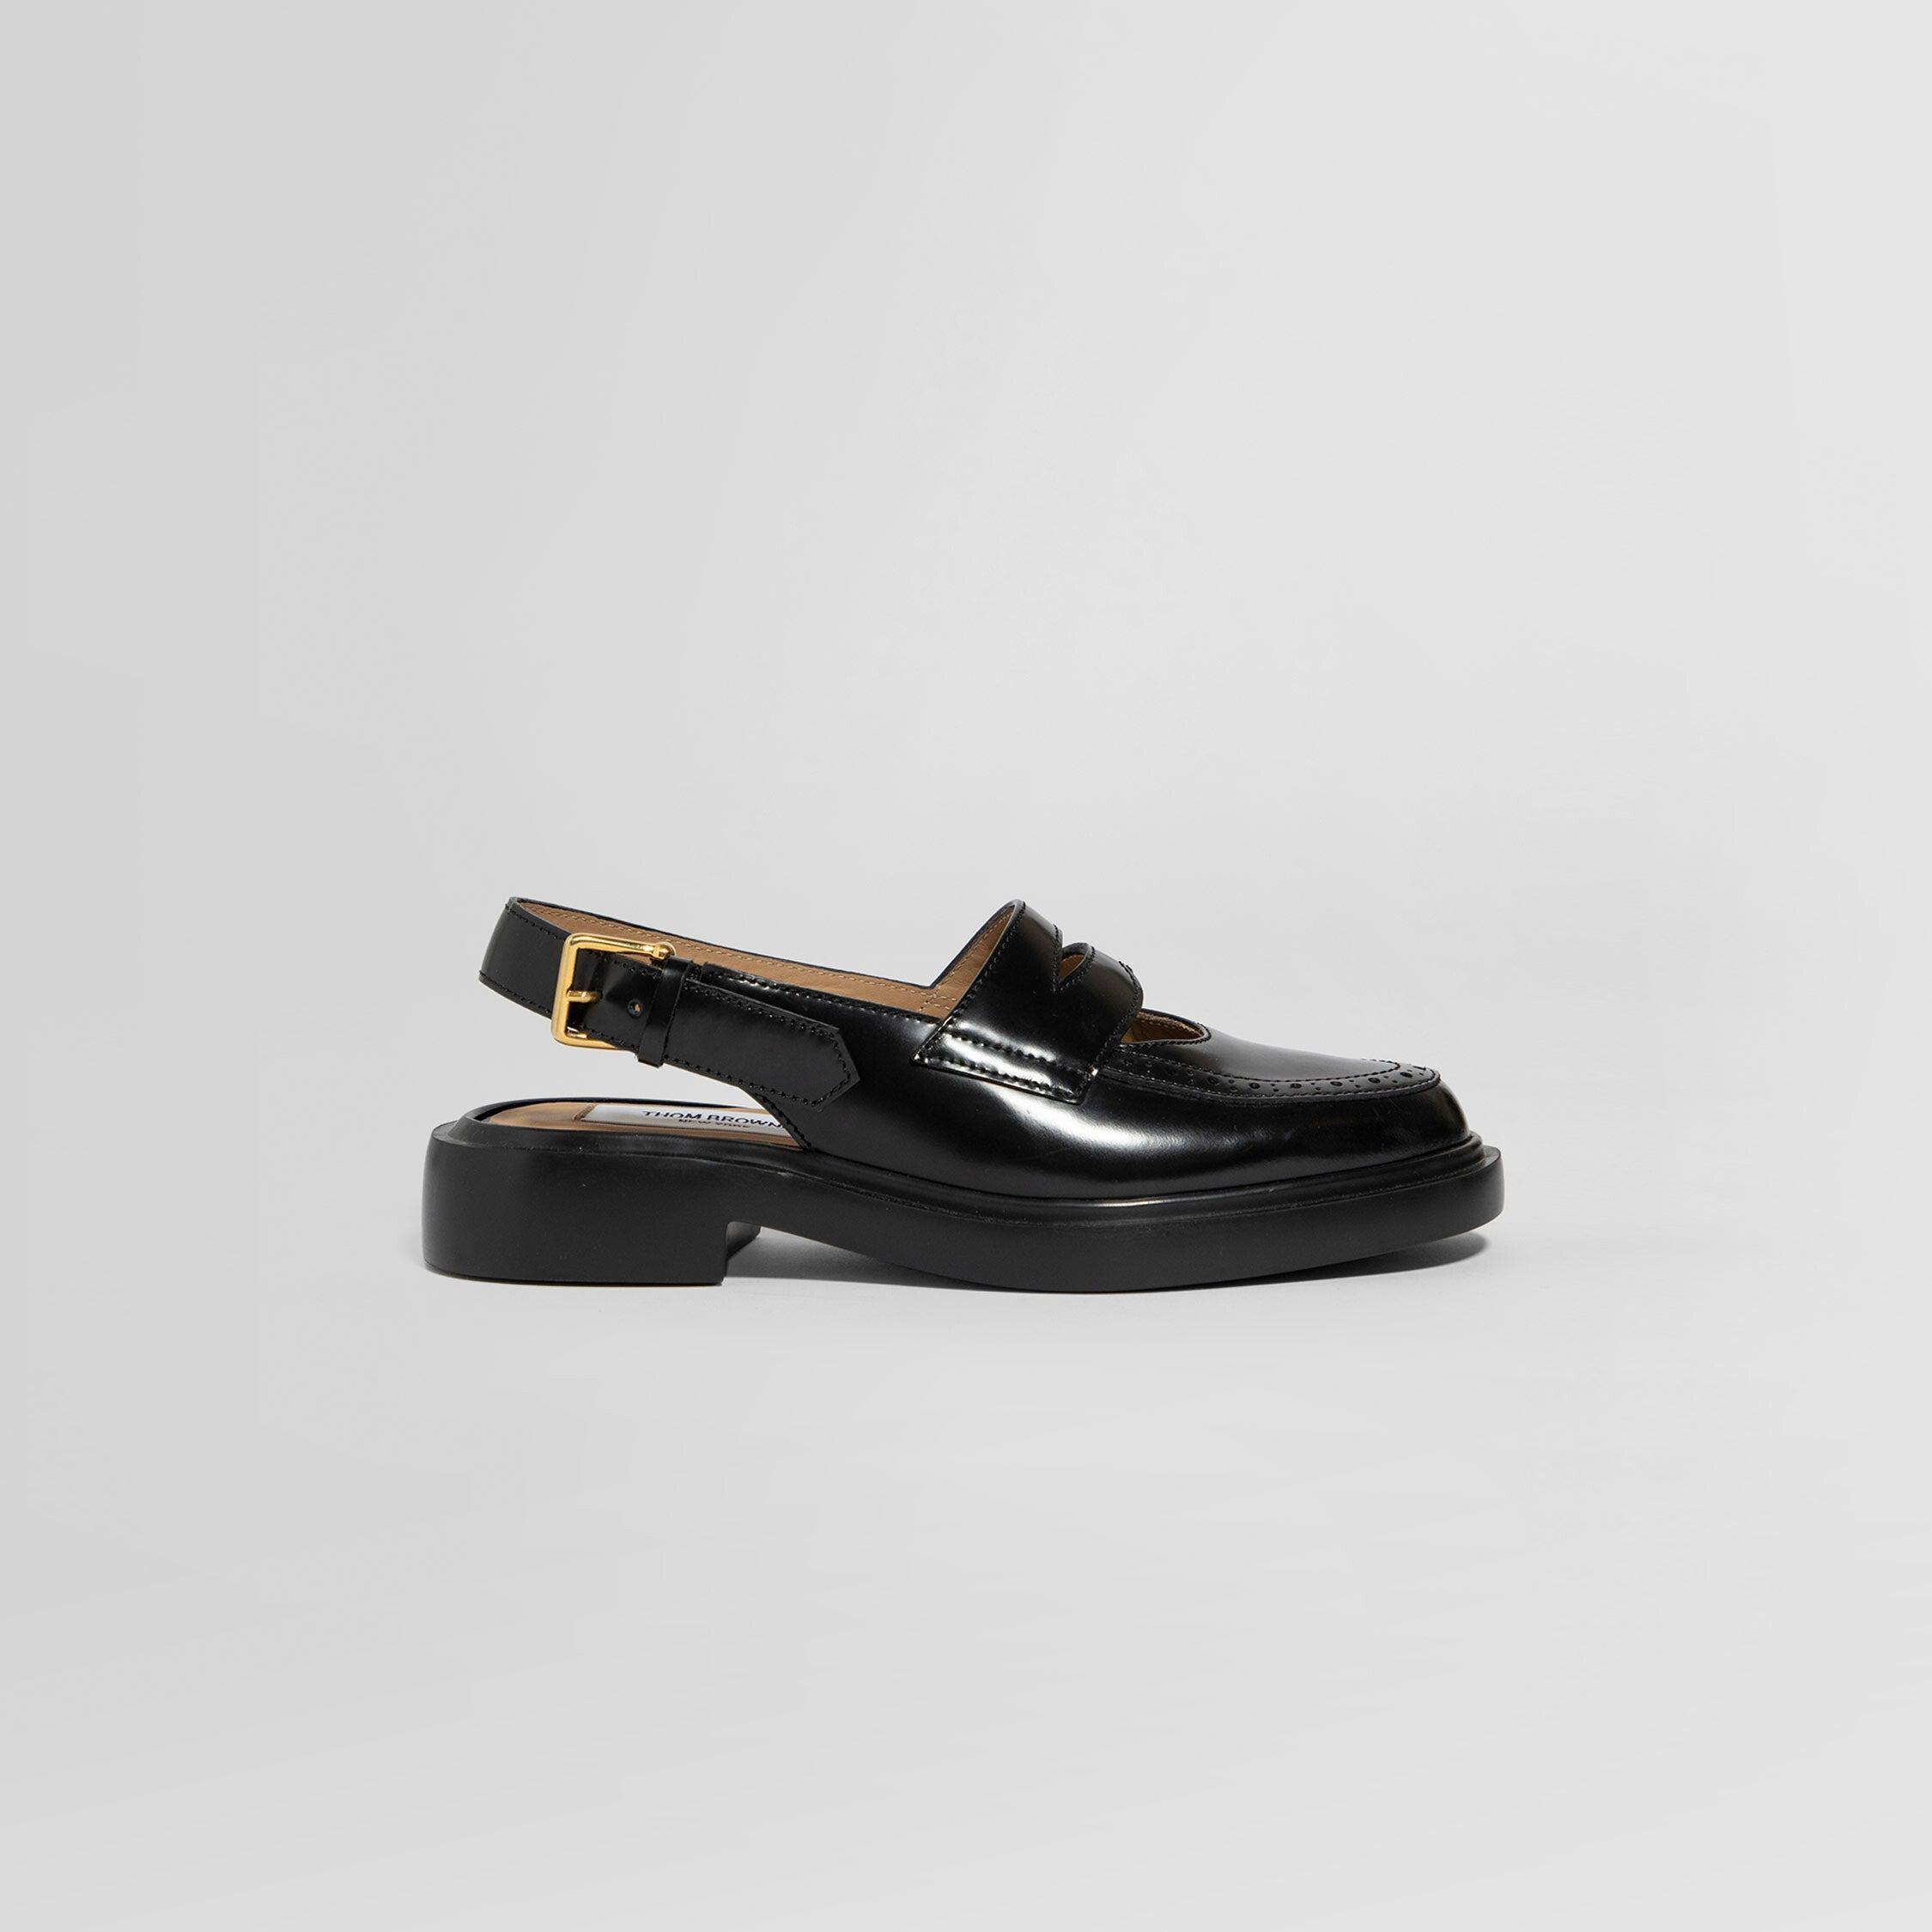 THOM BROWNE WOMAN BLACK LOAFERS